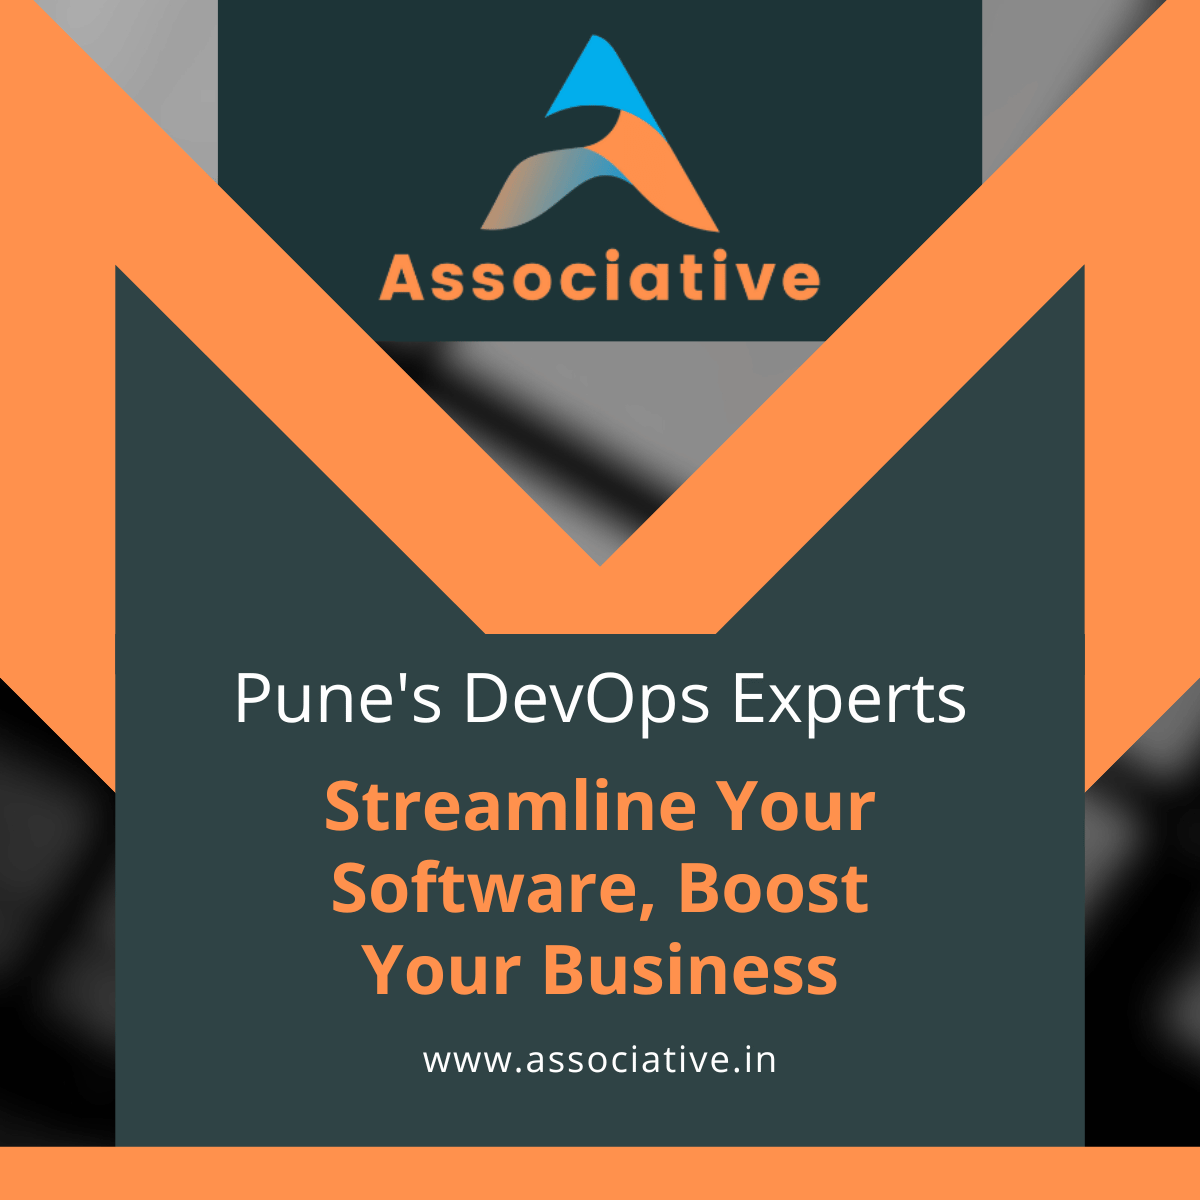 Pune's DevOps Experts: Streamline Your Software, Boost Your Business